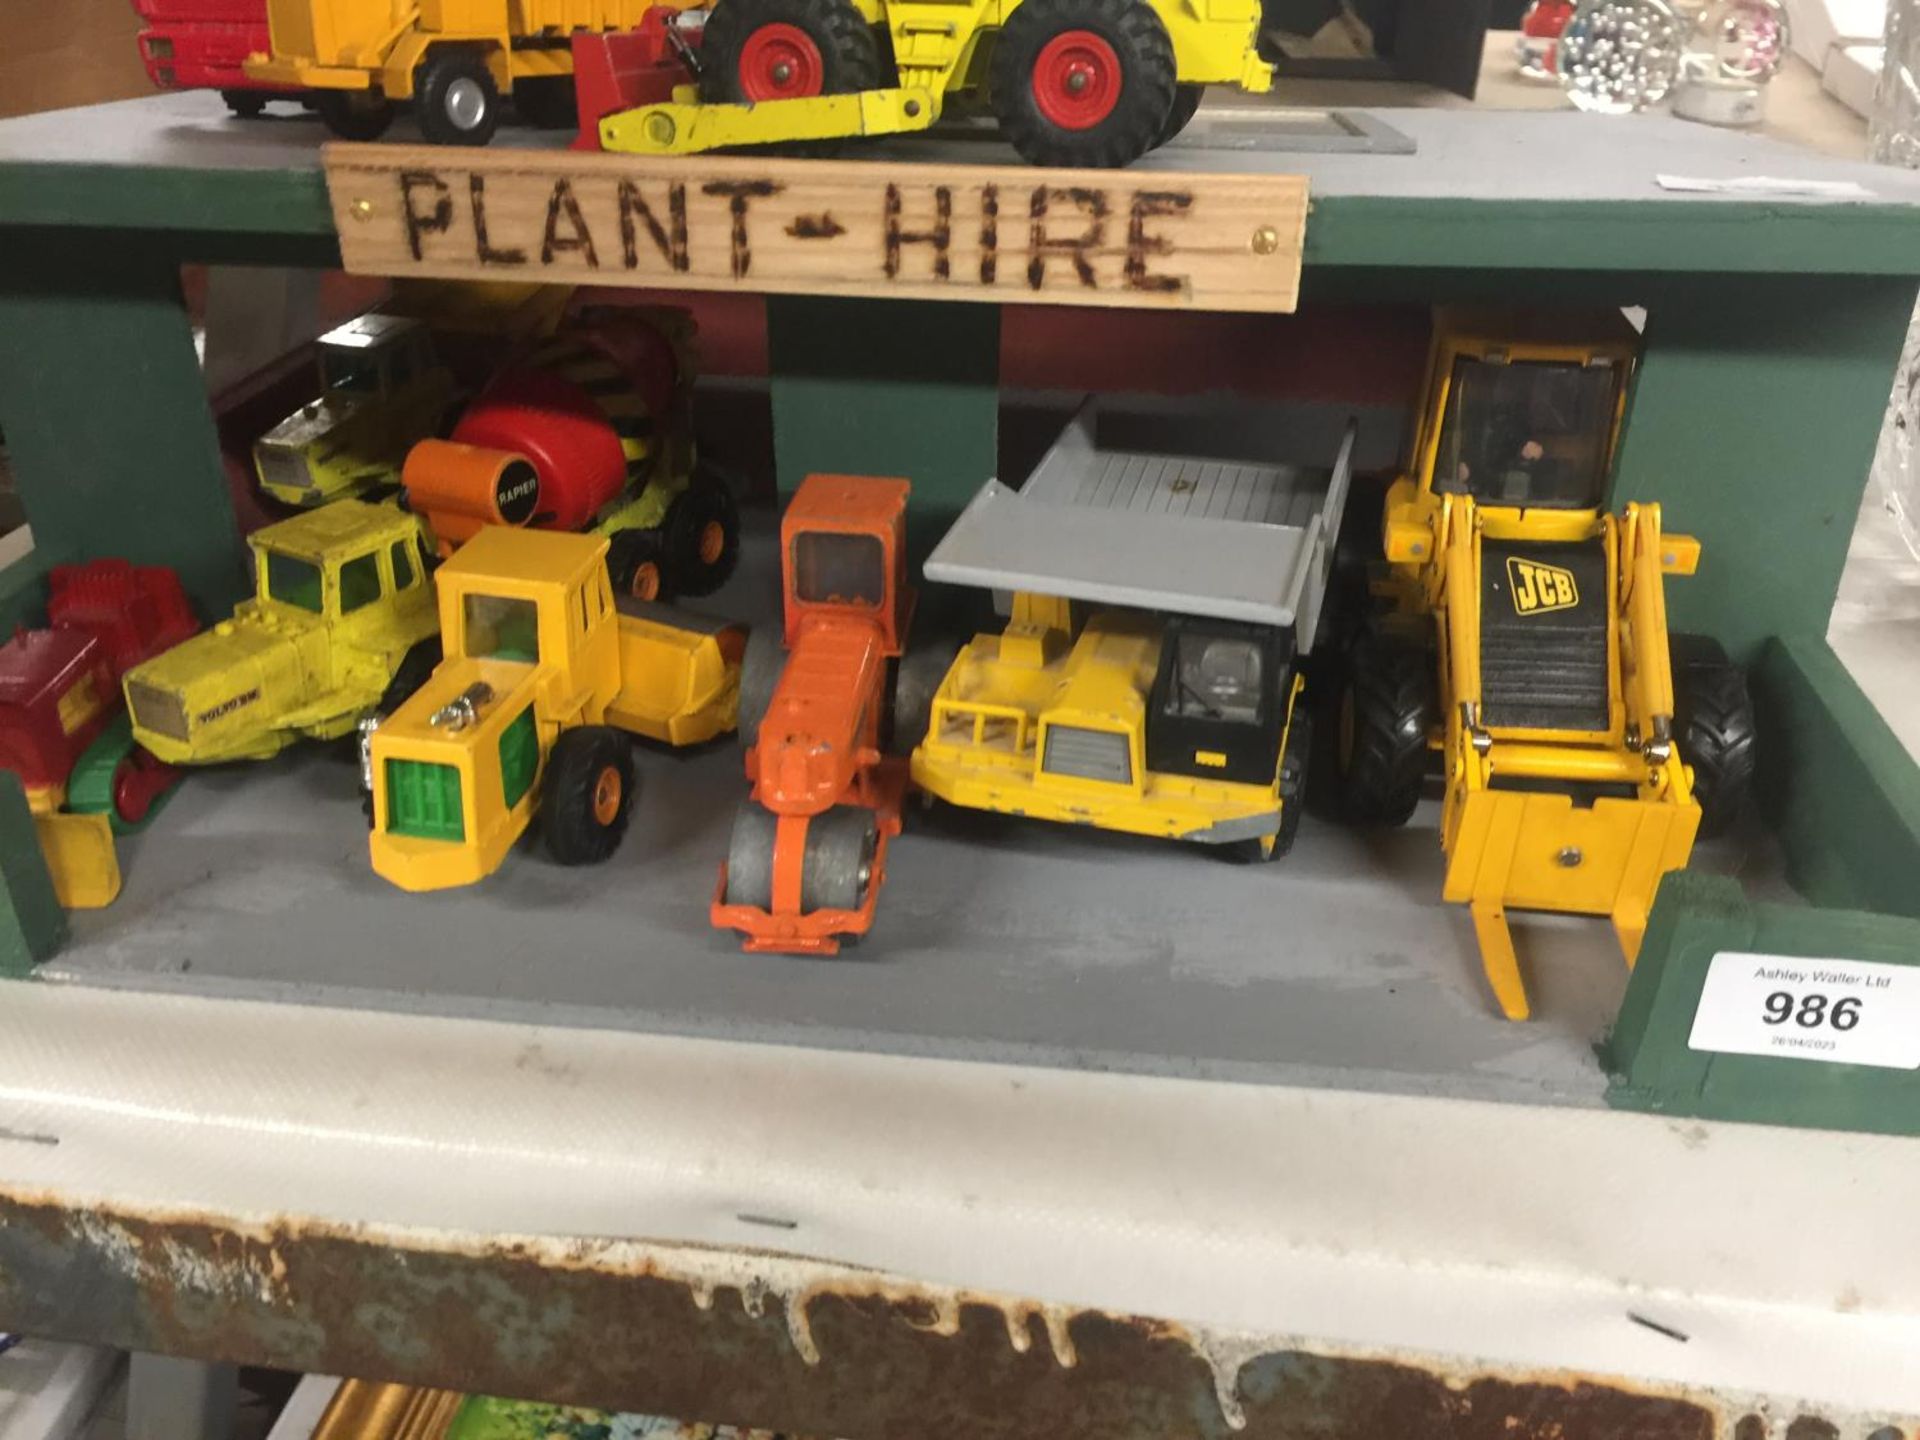 A PLANT HIRE GARAGE WITH TWELVE VARIOUS VEHICLES AND MACHINES - Image 2 of 3